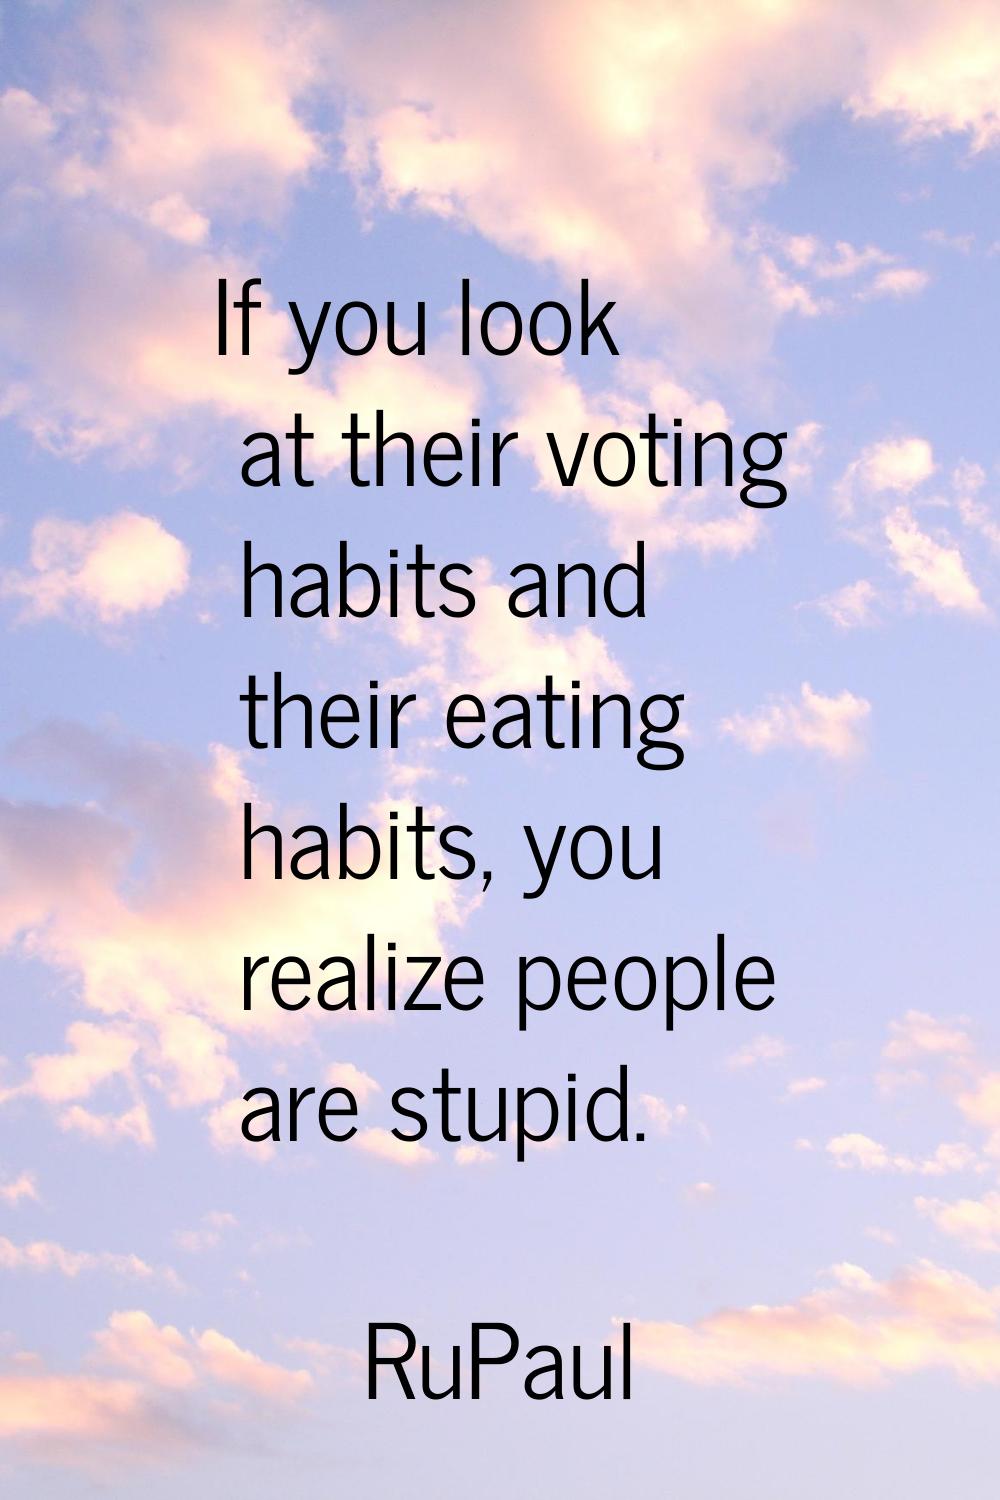 If you look at their voting habits and their eating habits, you realize people are stupid.